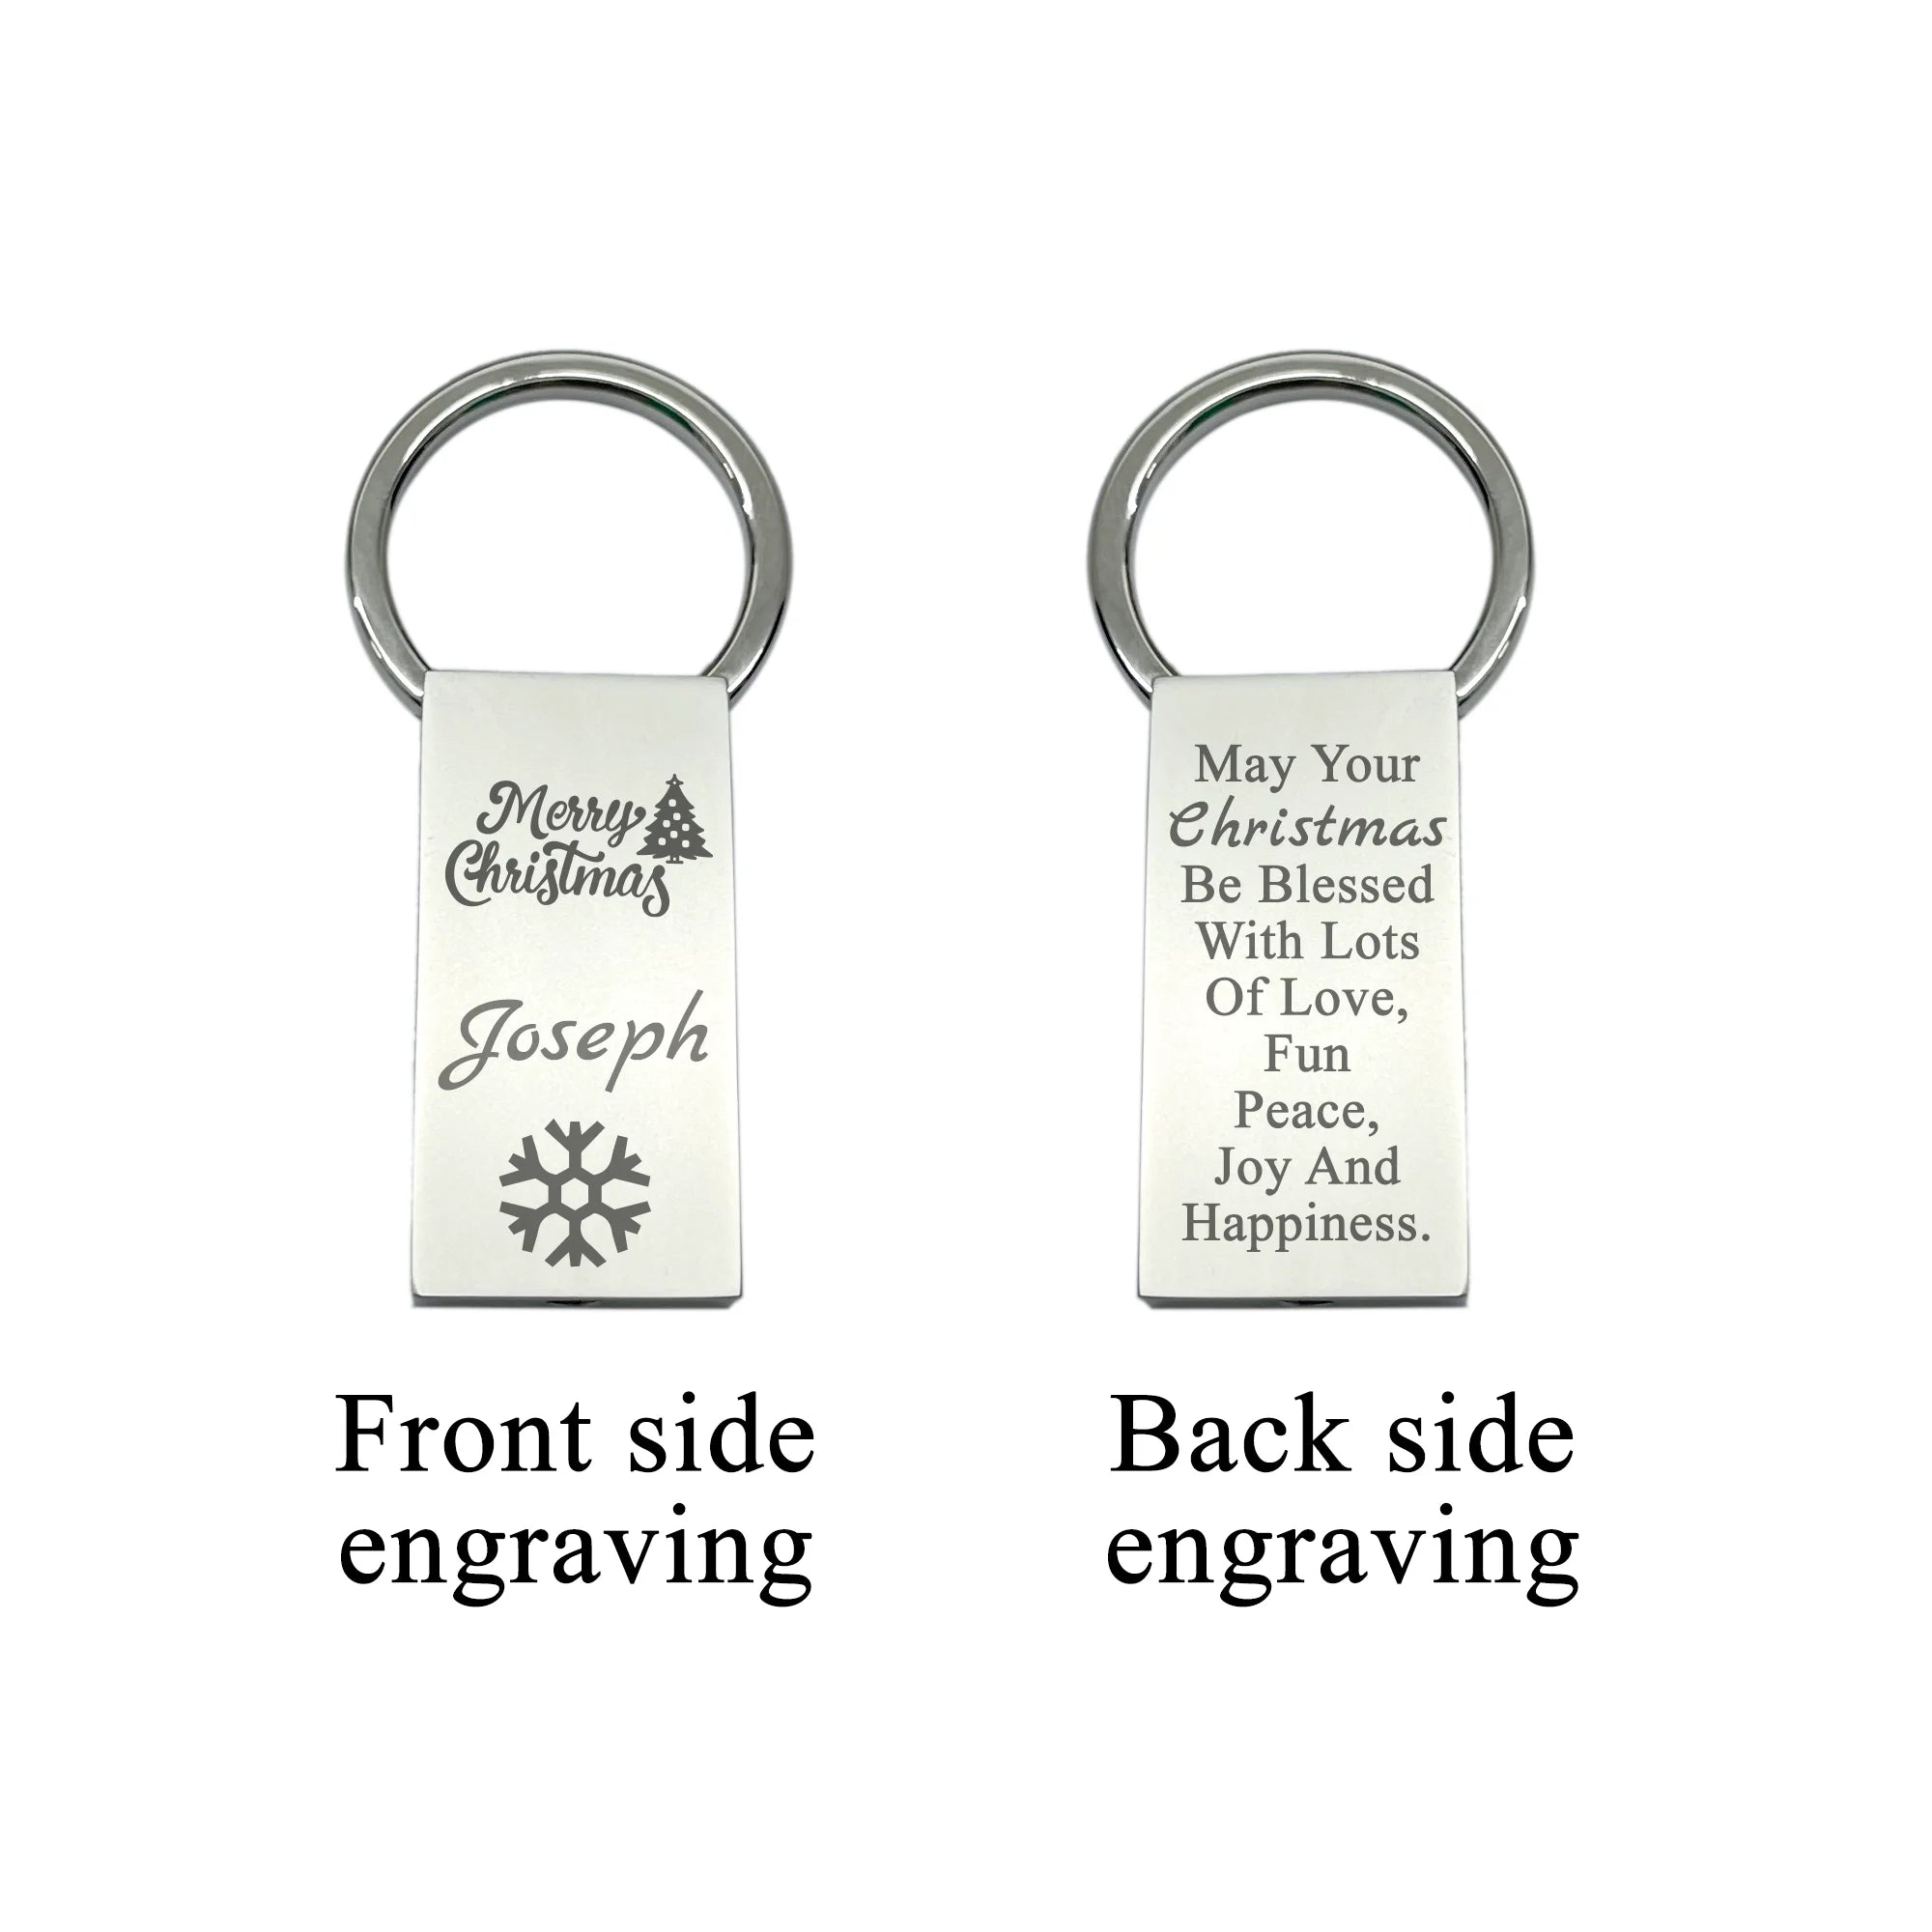 Appreciation Gifts,Best Friend Gift,Custom Photo Keyring,Customizable Keys,Engraved keychain,Family Holiday Gift,Holiday Season Gifts,Hotel Keychains,Name Tag Keychain,Personalized keyring,Stainless Steel,pet keychain,valentine day gift